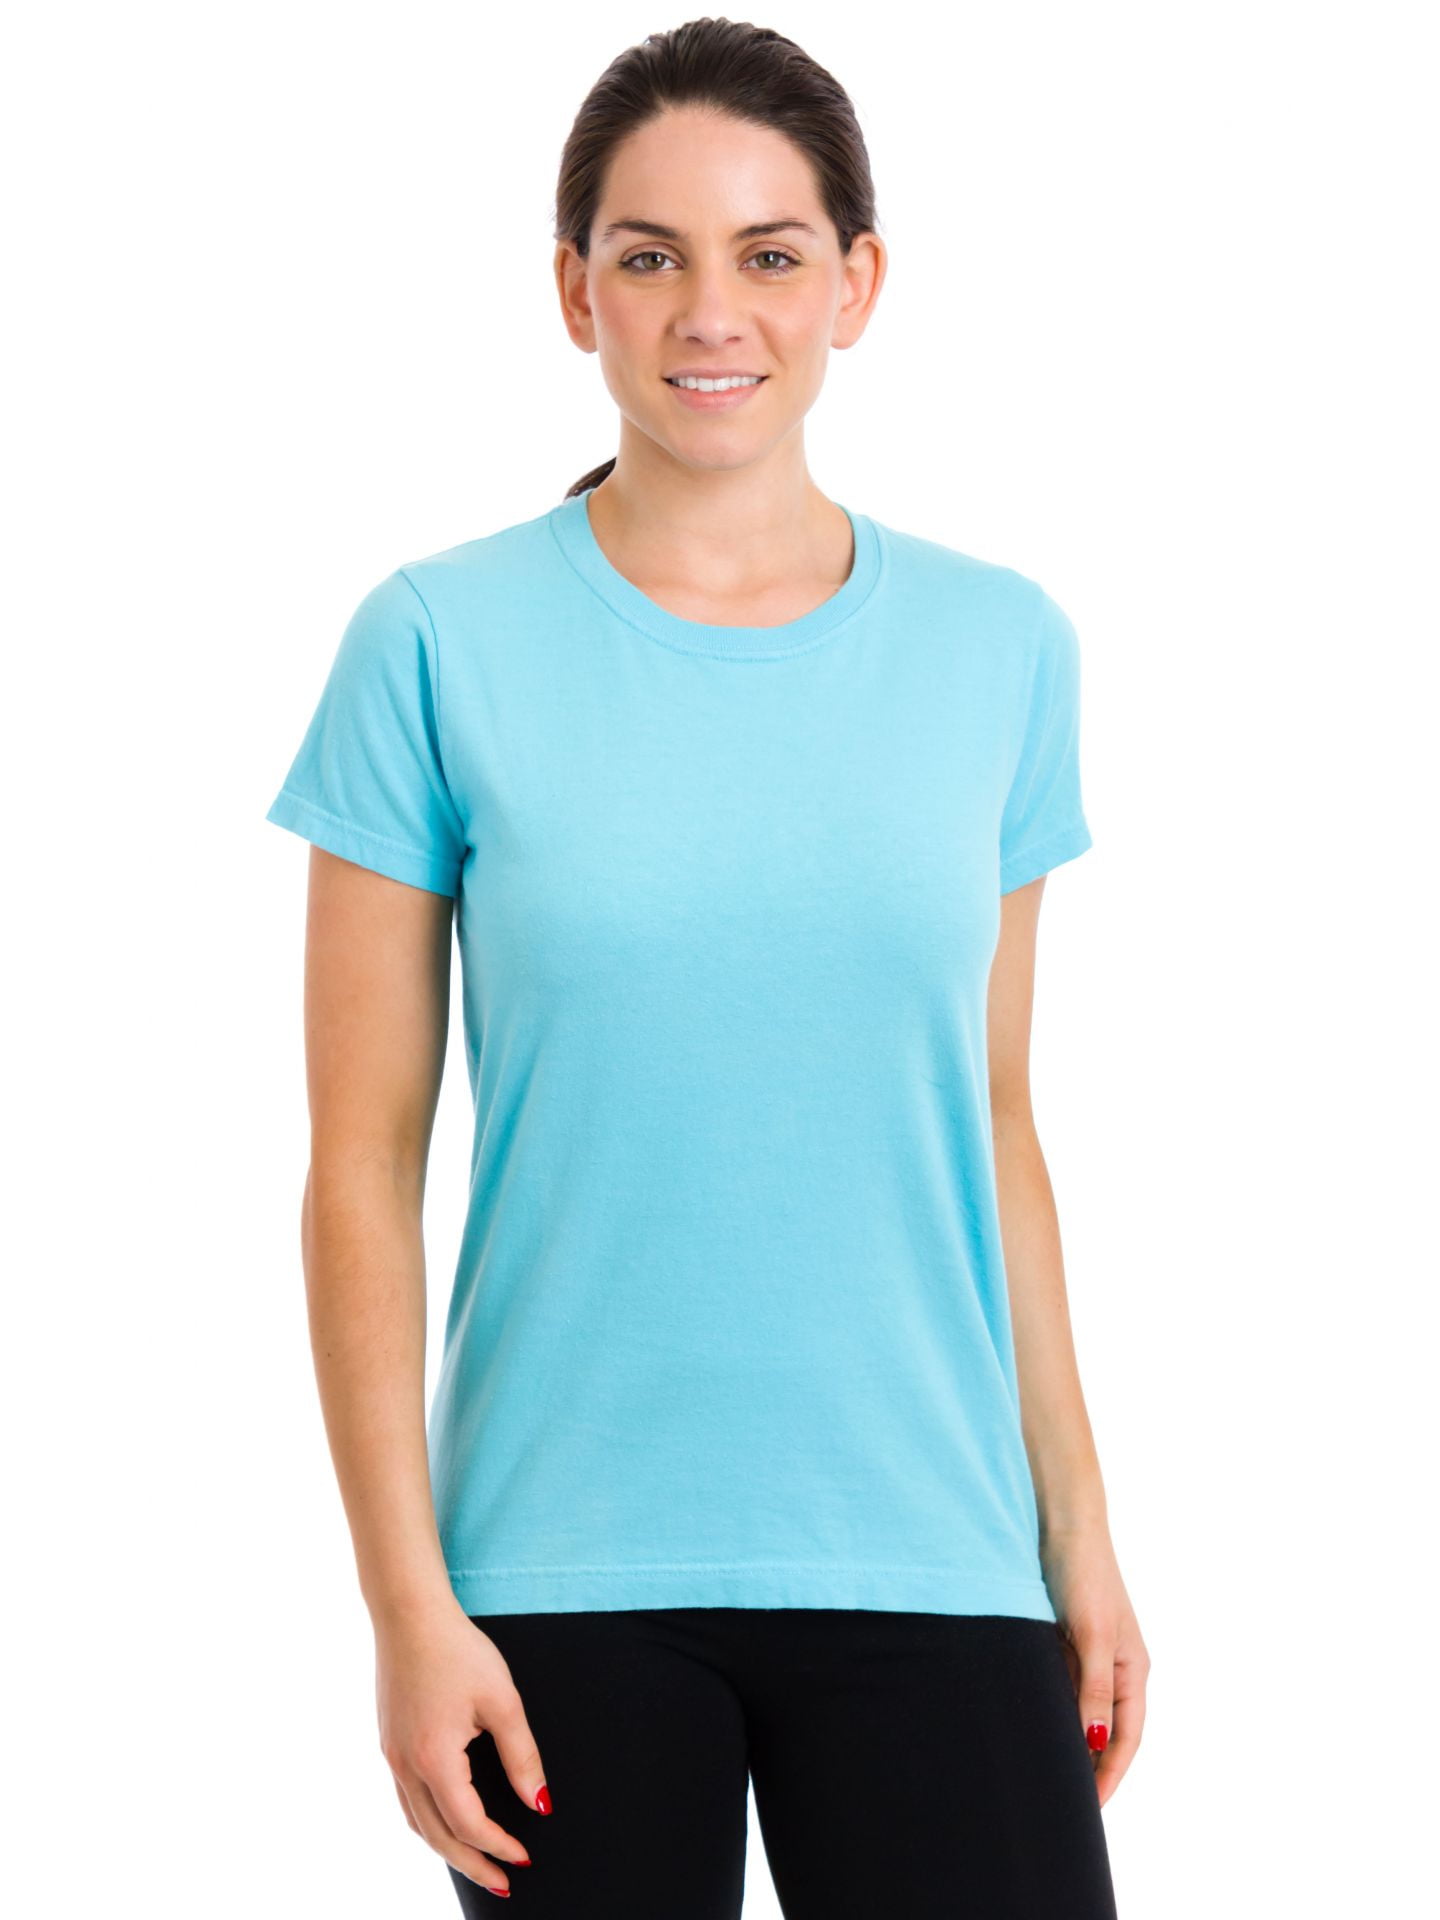 New Ladies Lagoon Blue Short Sleeve Blouse Style Shirt !!BUY ONE GET ONE FREE!!